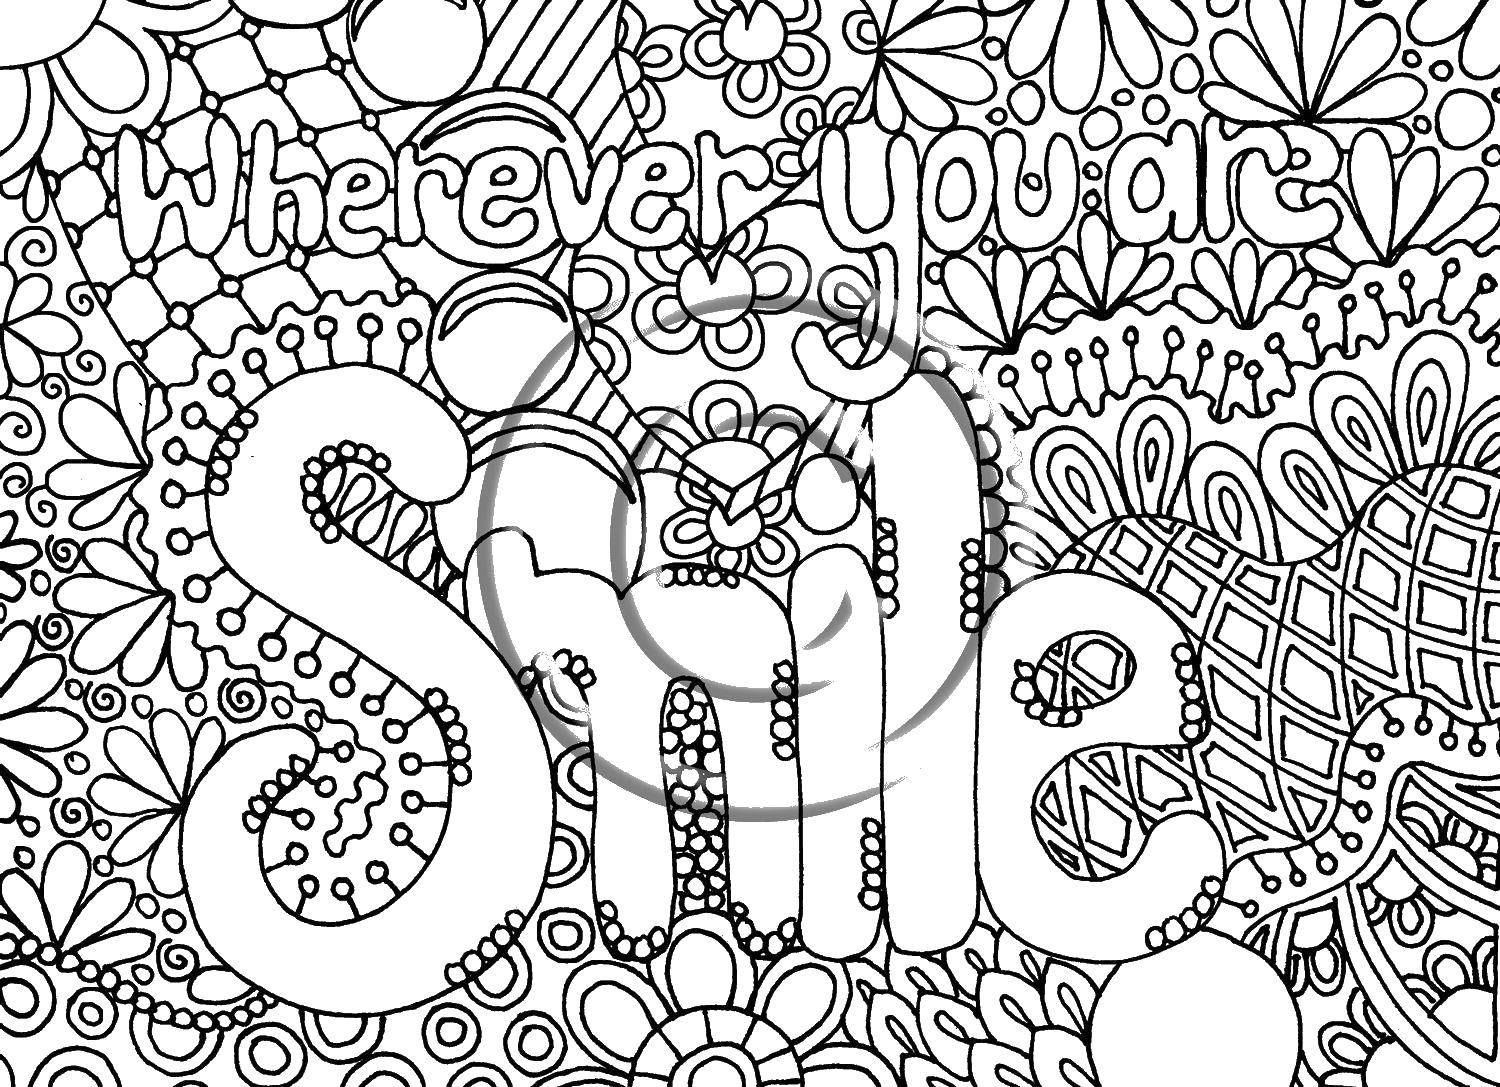 Coloring Coloring antistress. Category coloring antistress. Tags:  patterns, shapes, stress relief, smile.